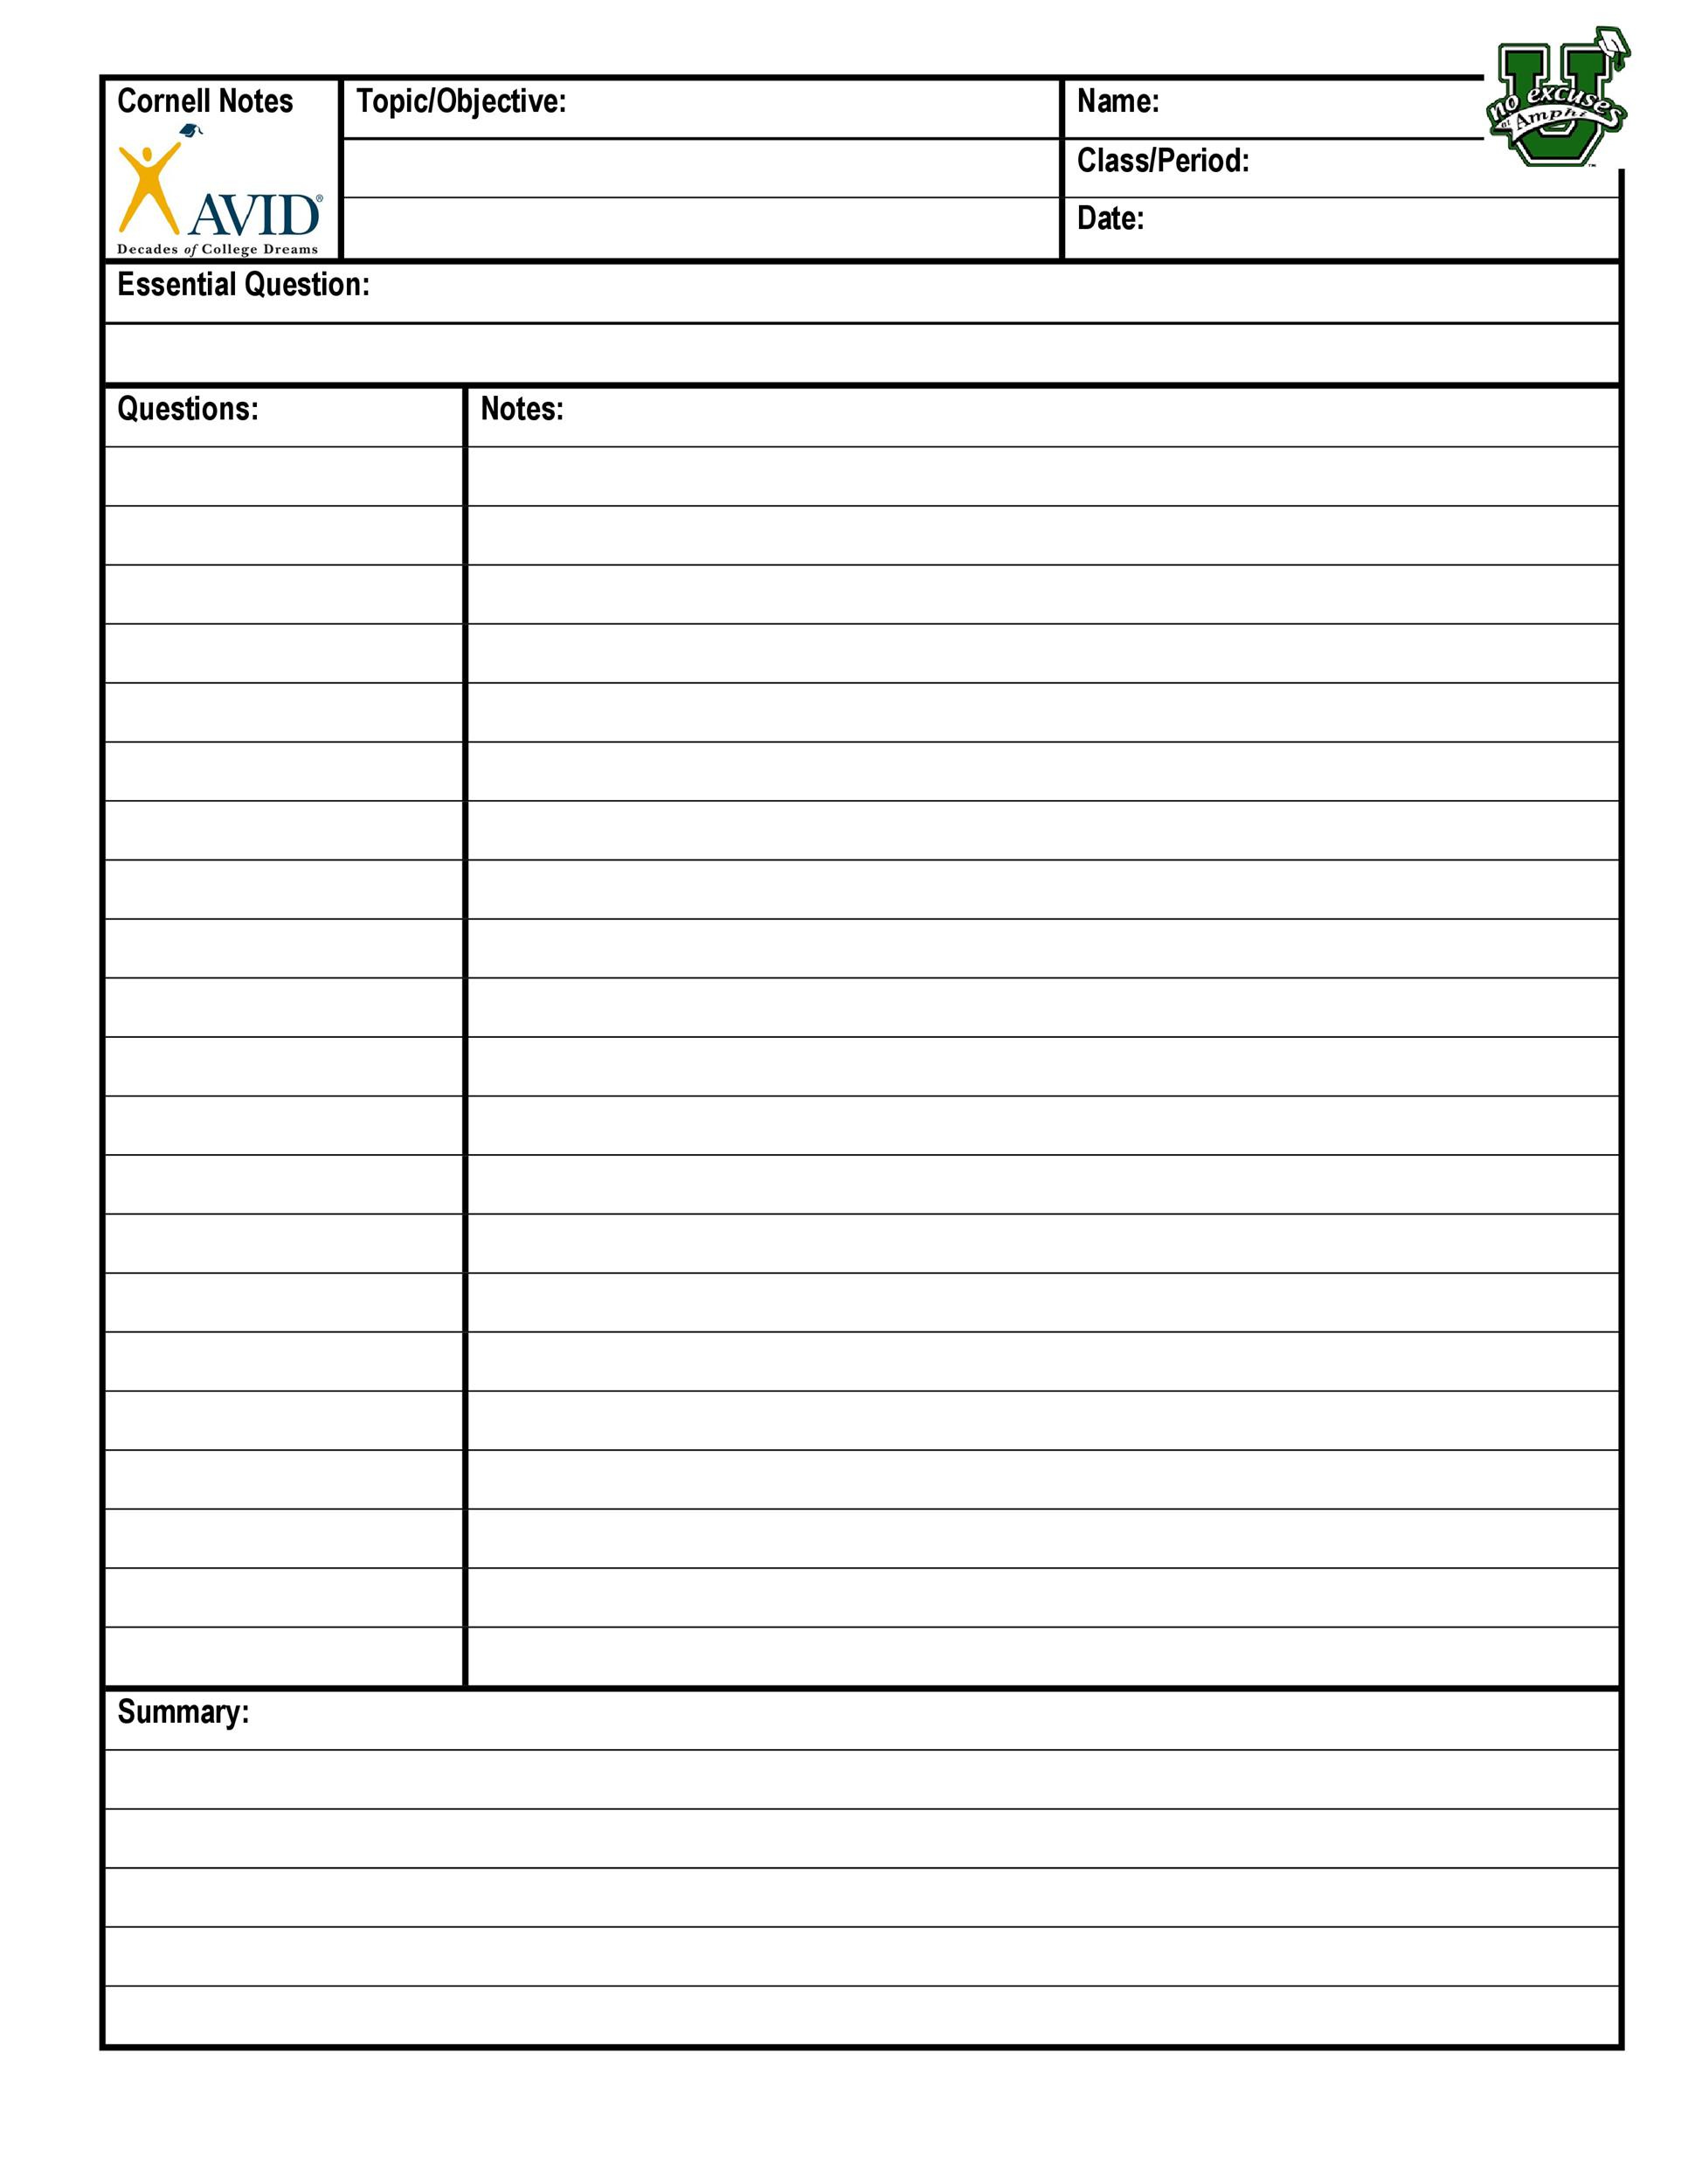 downloadable-cornell-notes-template-card-template